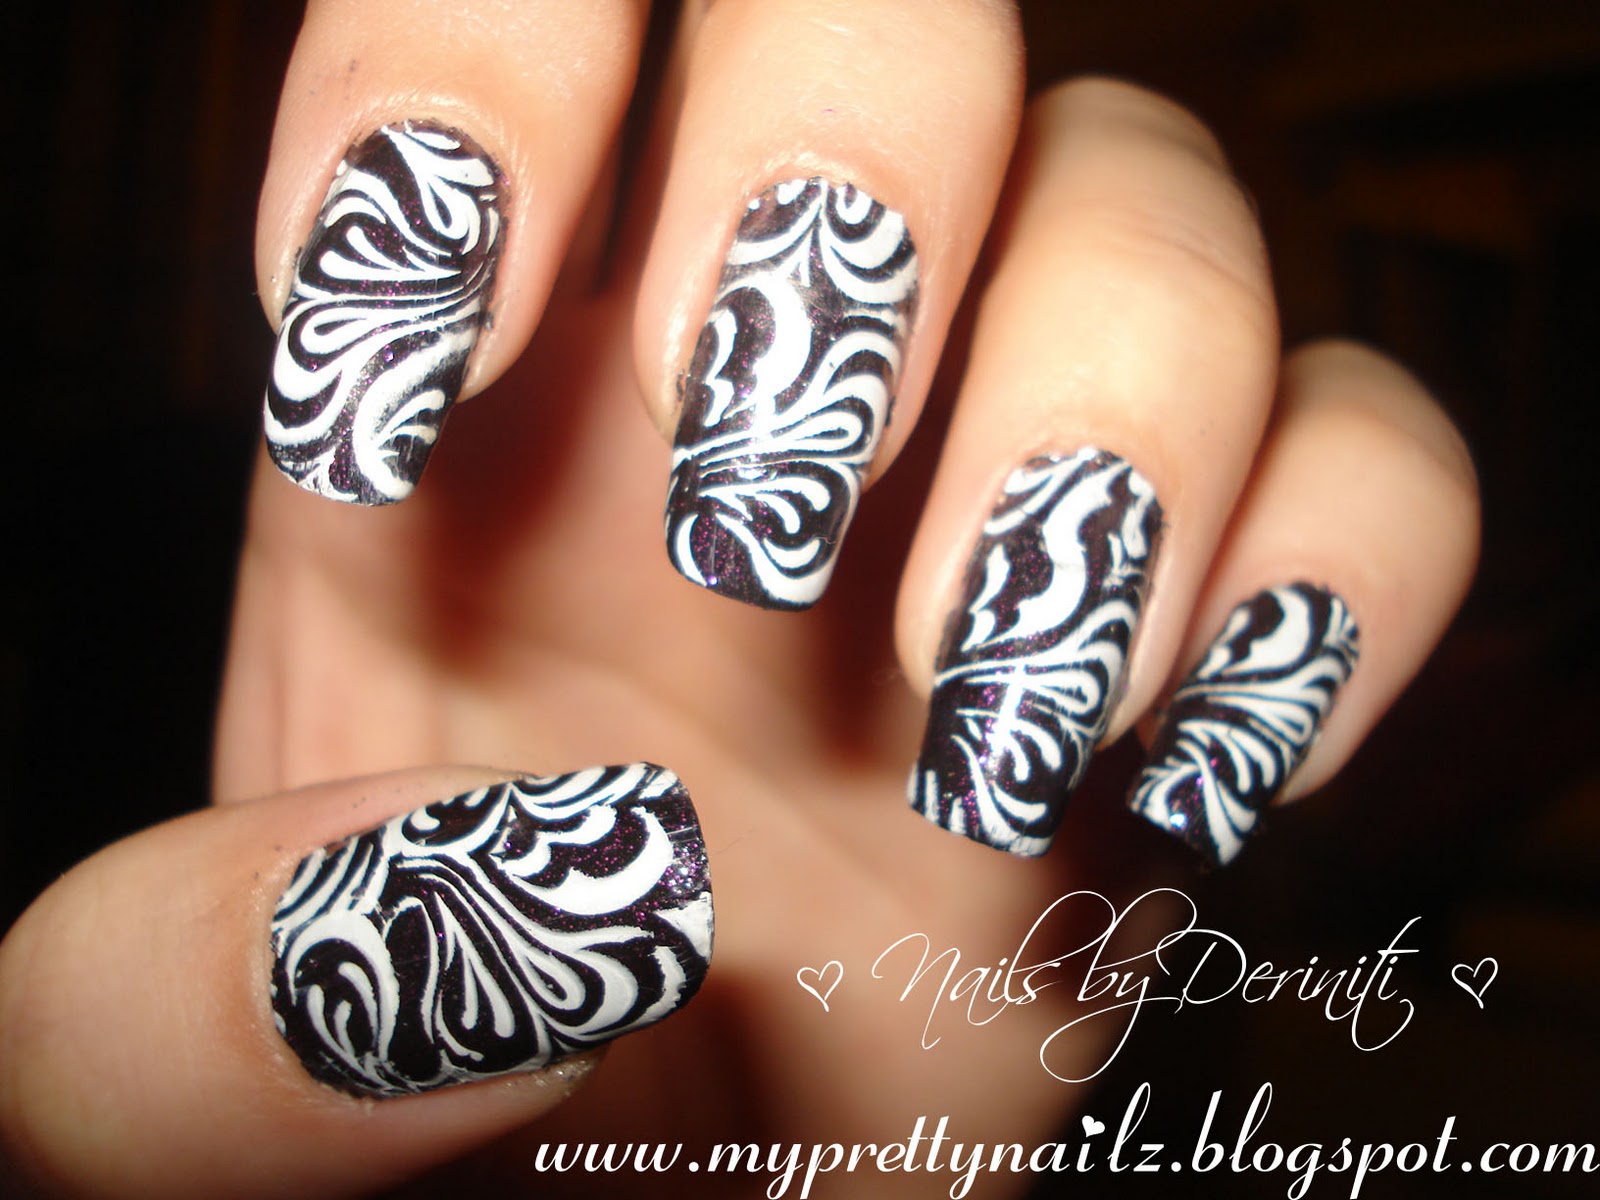 50+ Black and White Nail Art Designs on Pinterest - wide 9